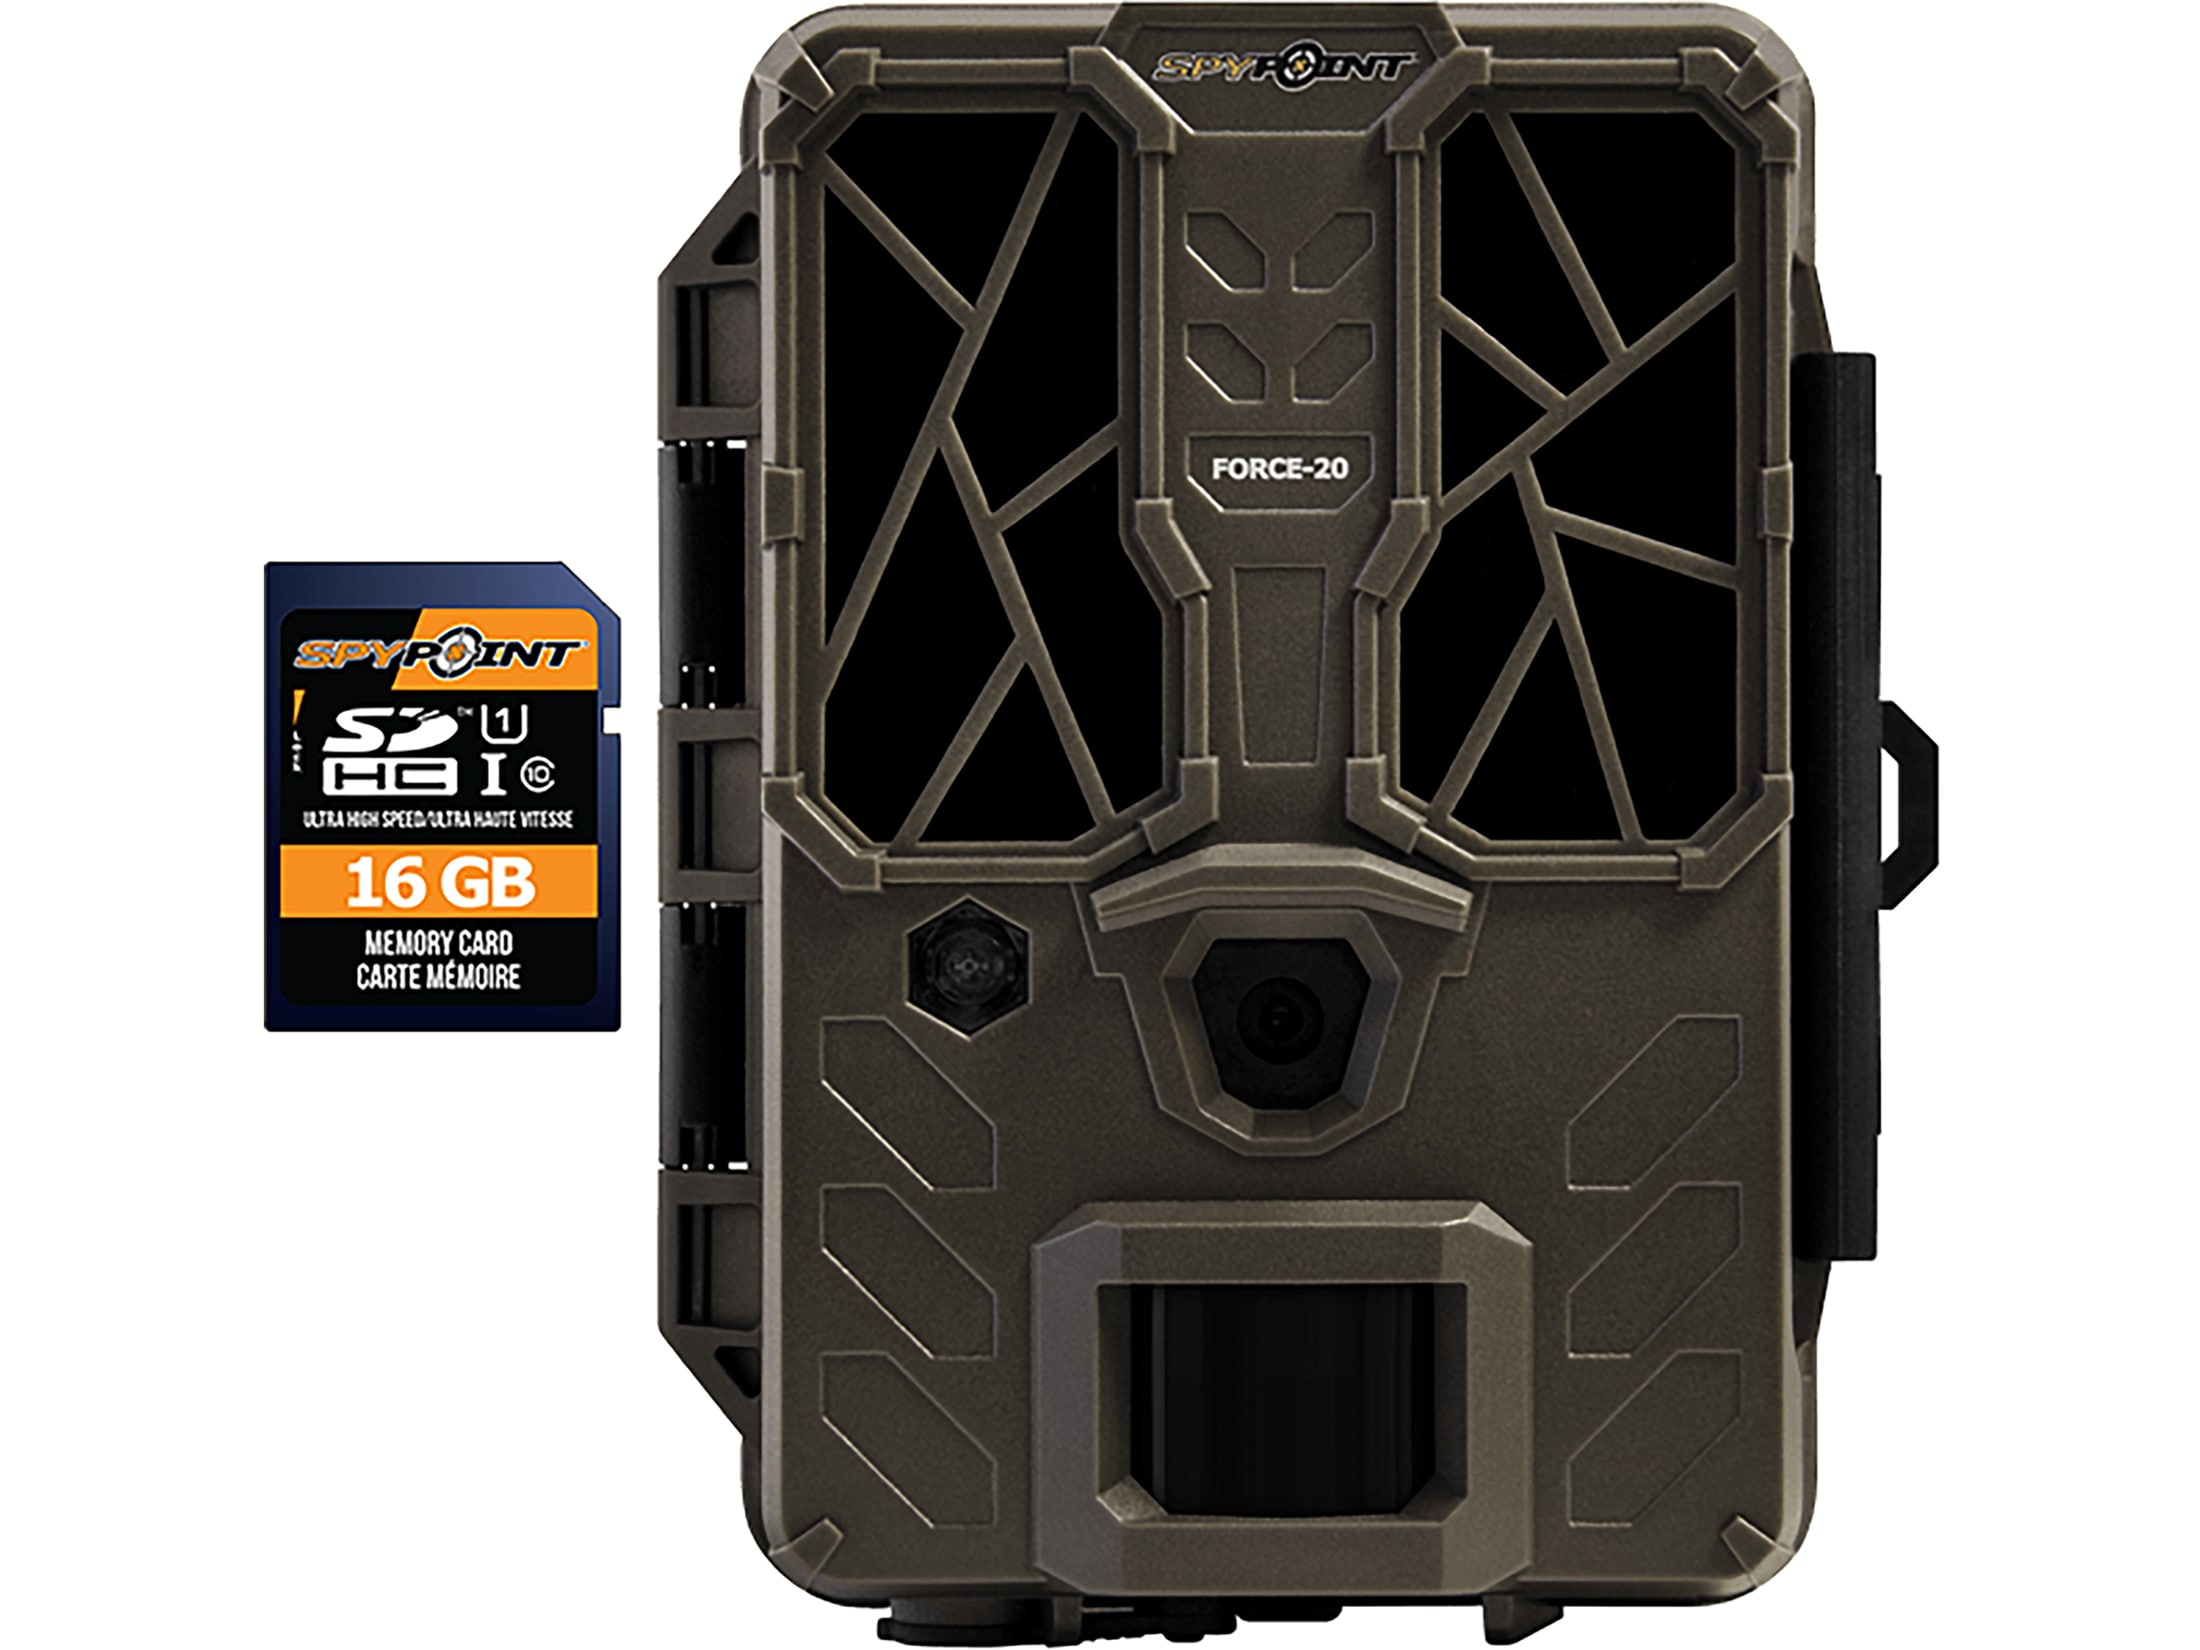 Spypoint Force 20 HD Trail Camera 20 MP